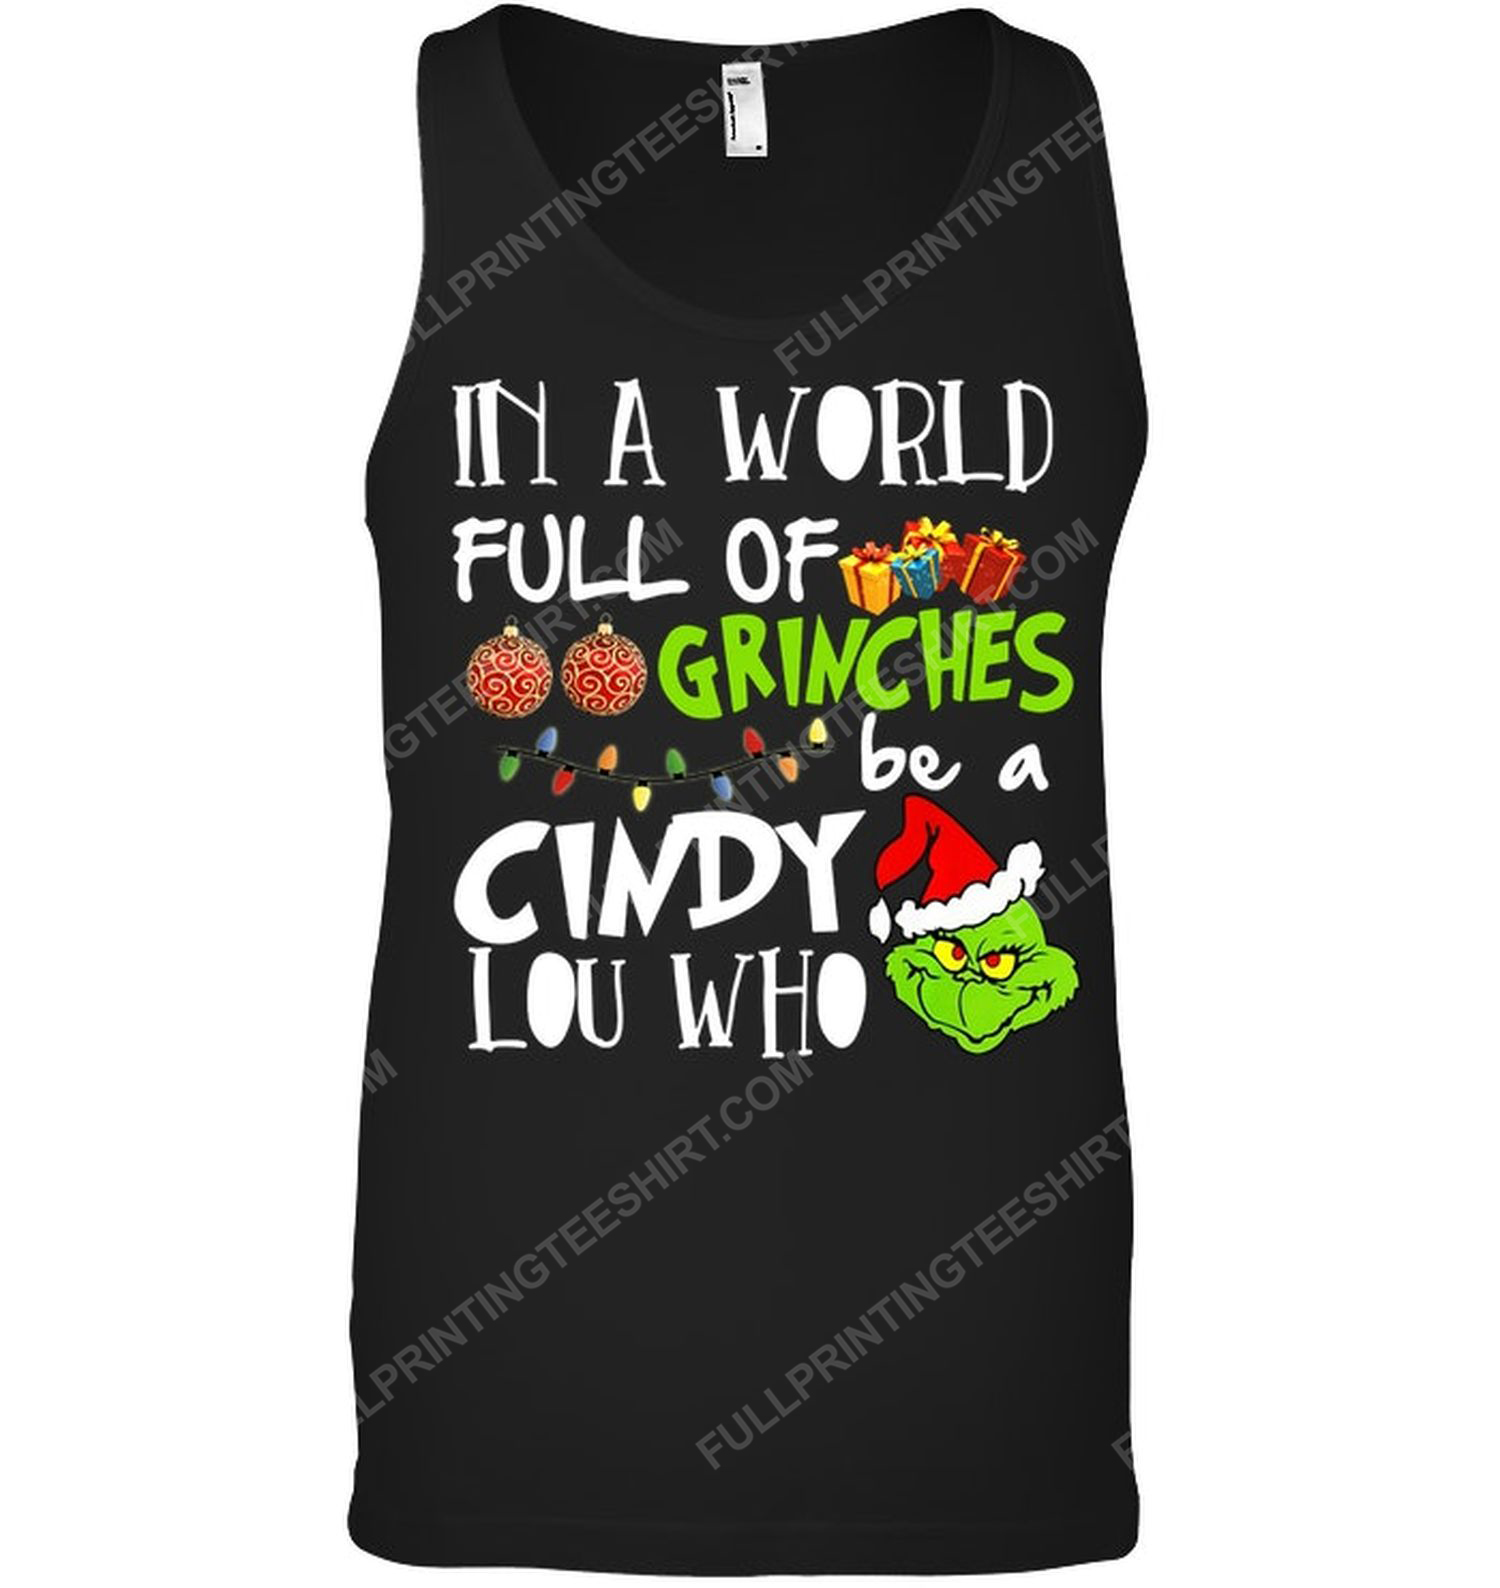 In a world grinches be a cindy lou who tank top